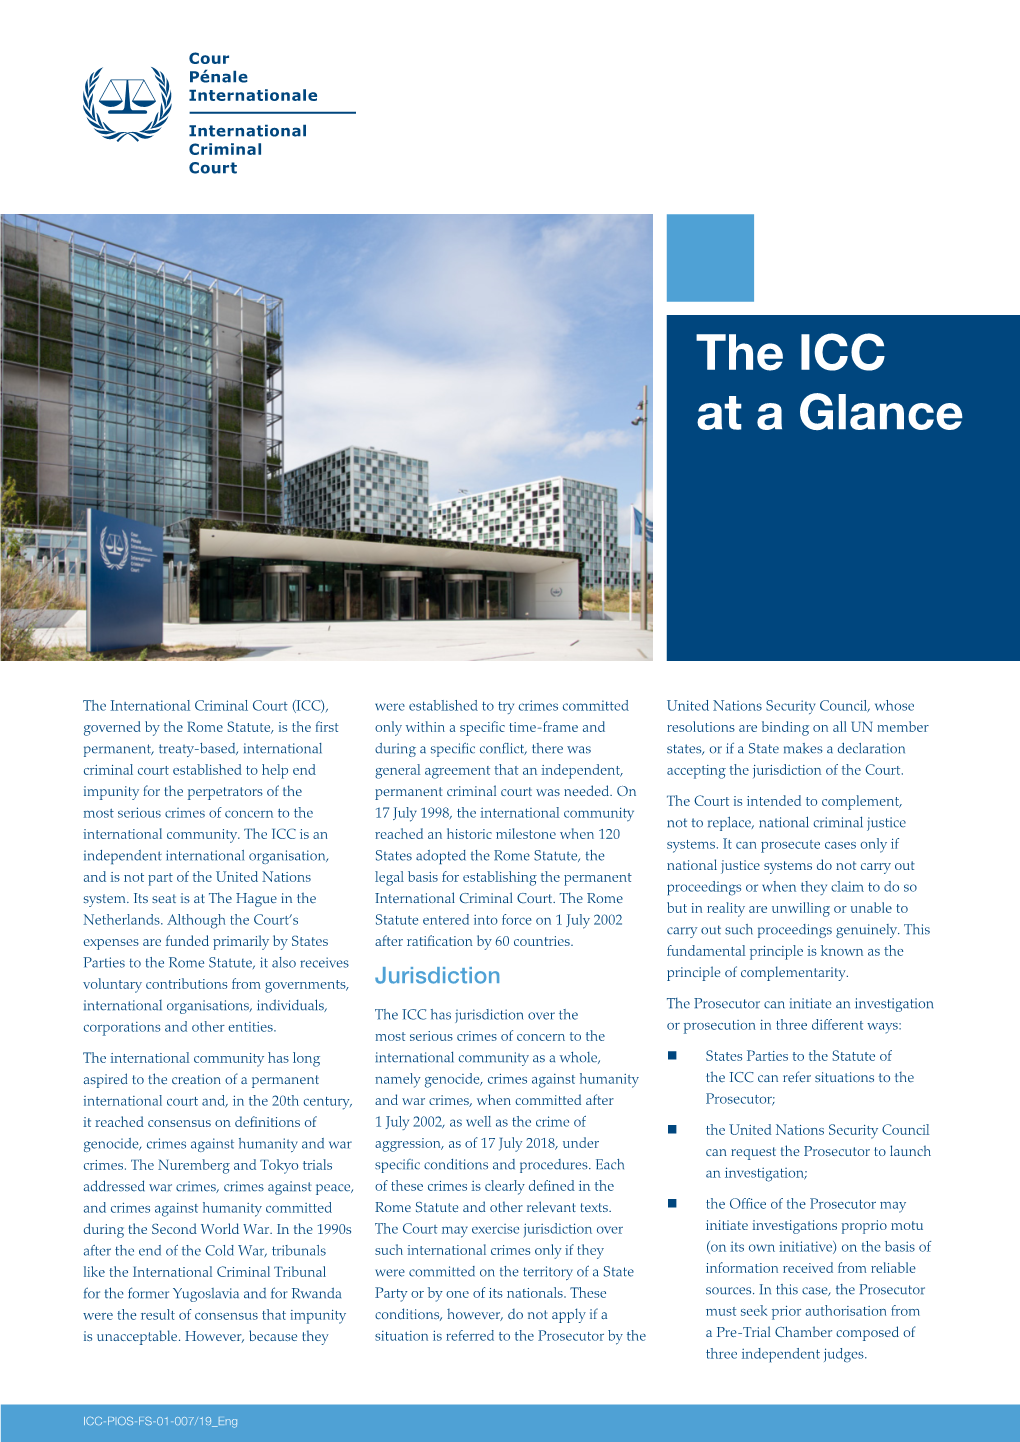 The ICC at a Glance